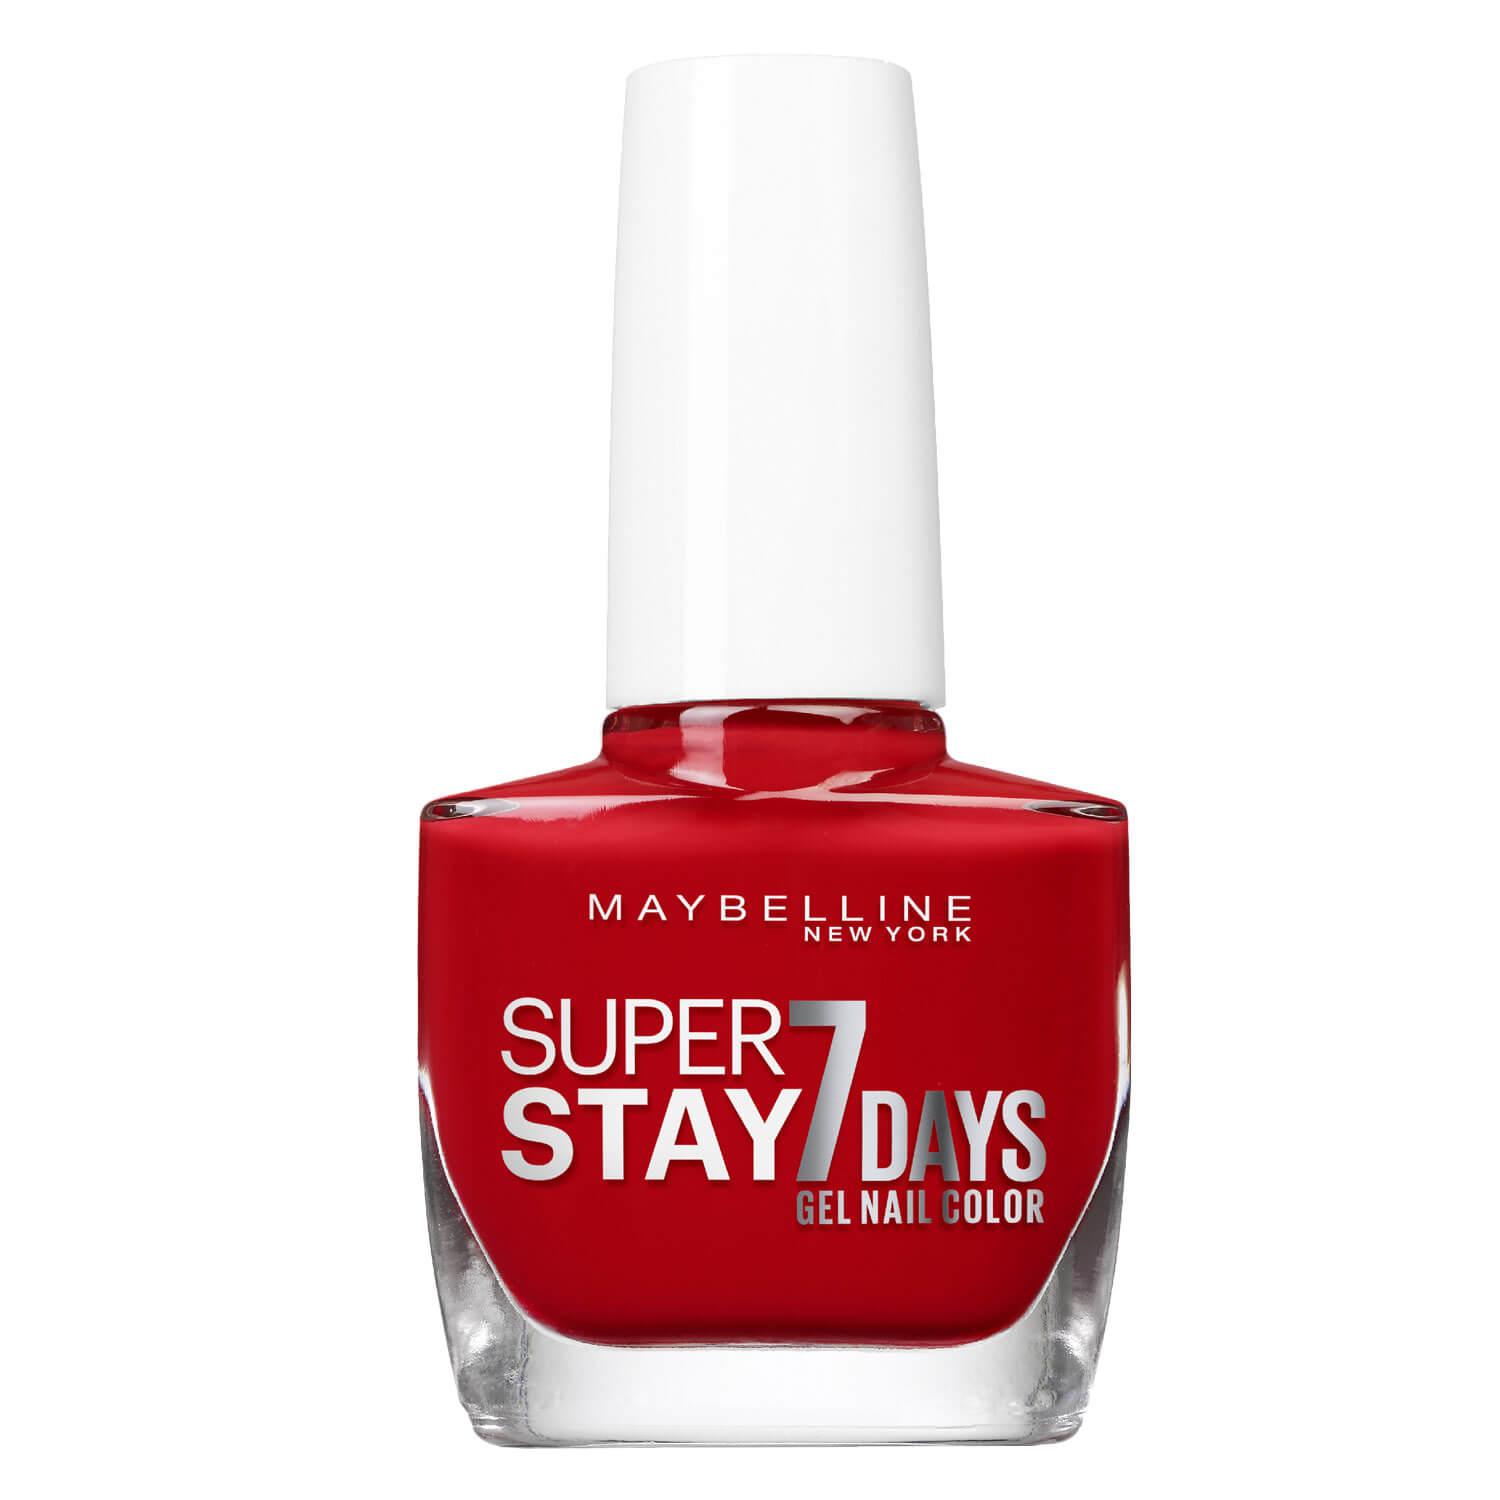 Maybelline NY Nails - Super Stay 7 Days Nagellack Nr. 08 Passionate Red